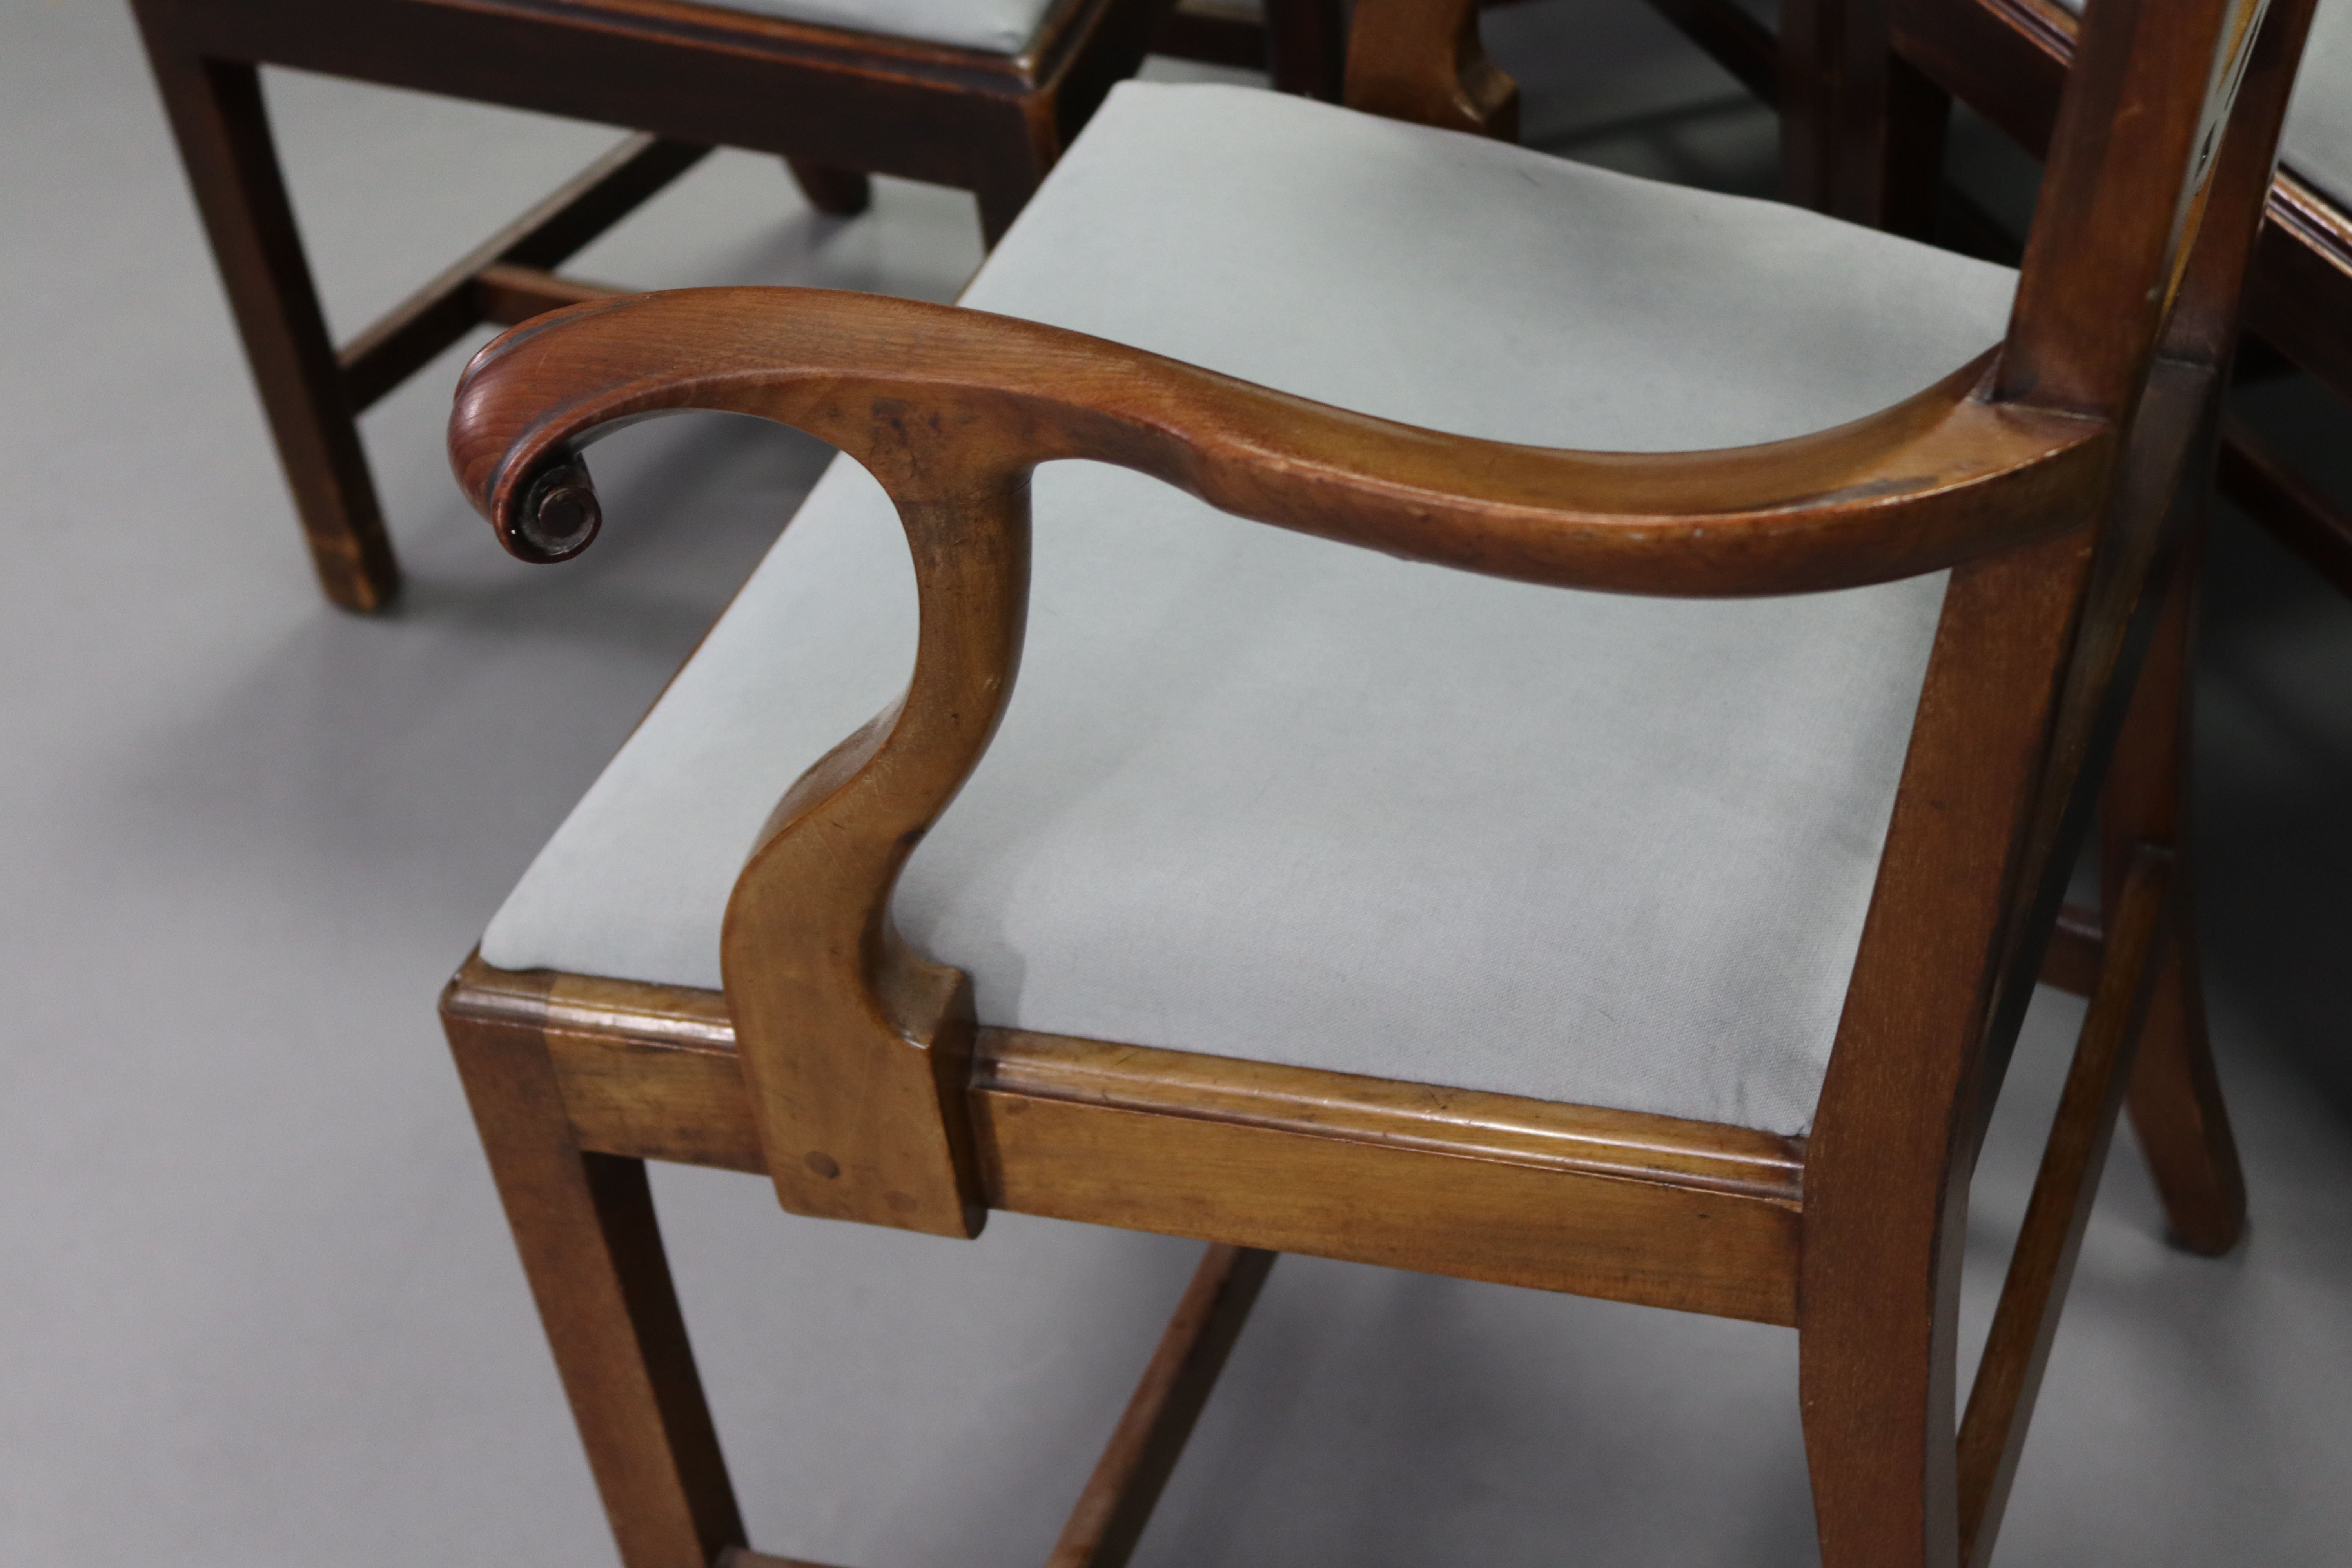 A set of six 18th century-style mahogany dining chairs, including an elbow chair, each with - Image 3 of 3